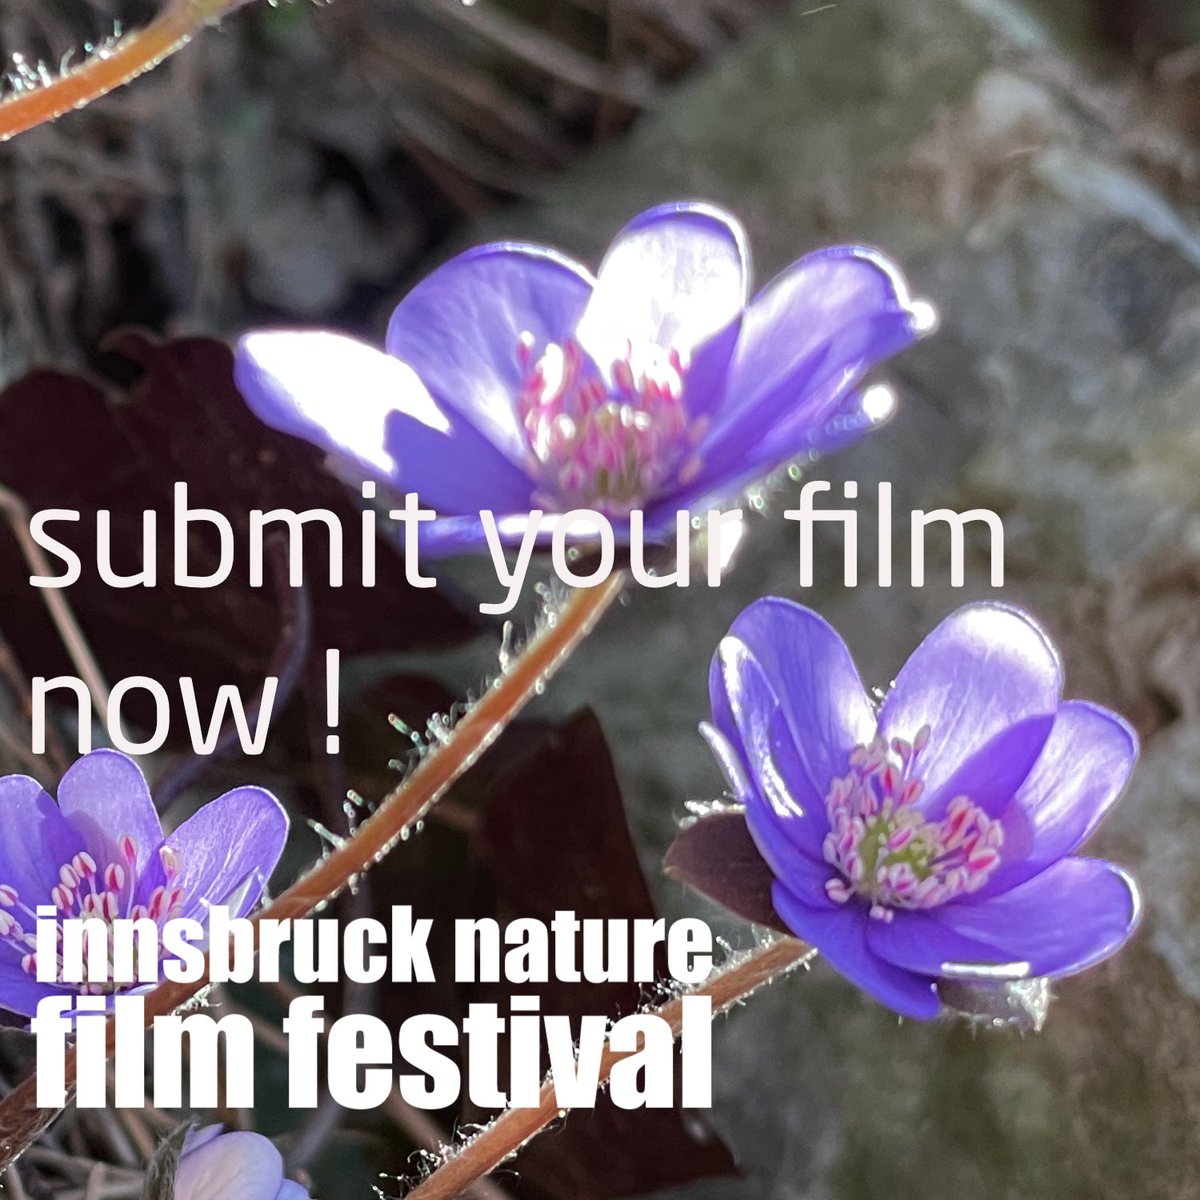 Filmmakers, production companies, the submission window at INNSBRUCK NATURE FILM FESTIVAL is open now! Great prize of the city of Innsbruck and other awards wait for your film! New category for mid-length films! inff.eu